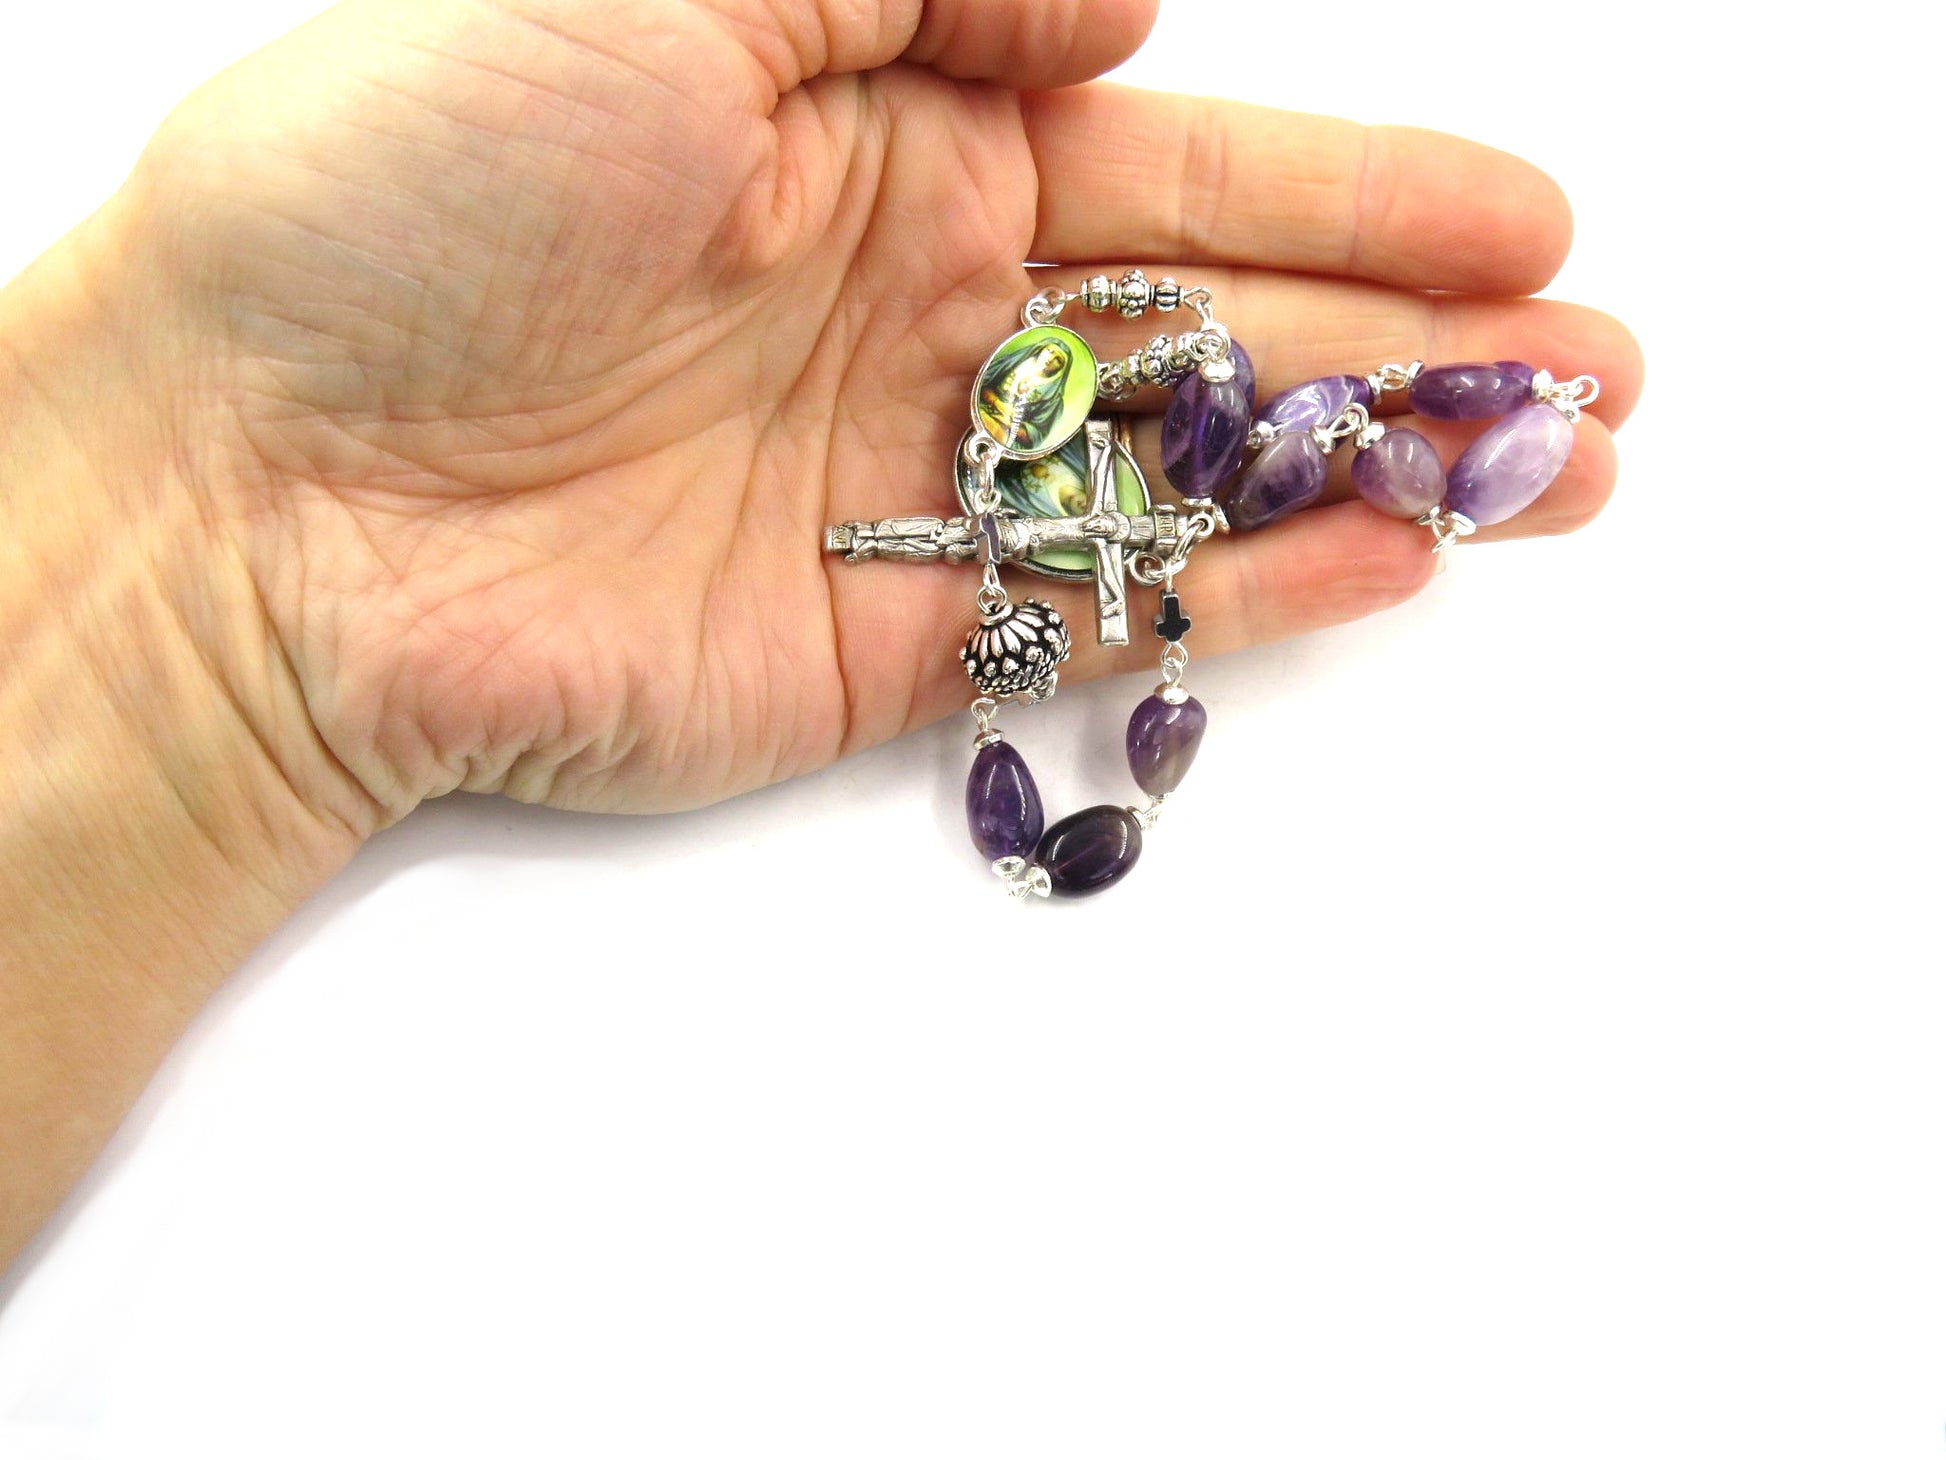 Pocket servite unique dolor rosary with purple gemstone beads and silver crucifix and Our Lady of Sorrows medals.